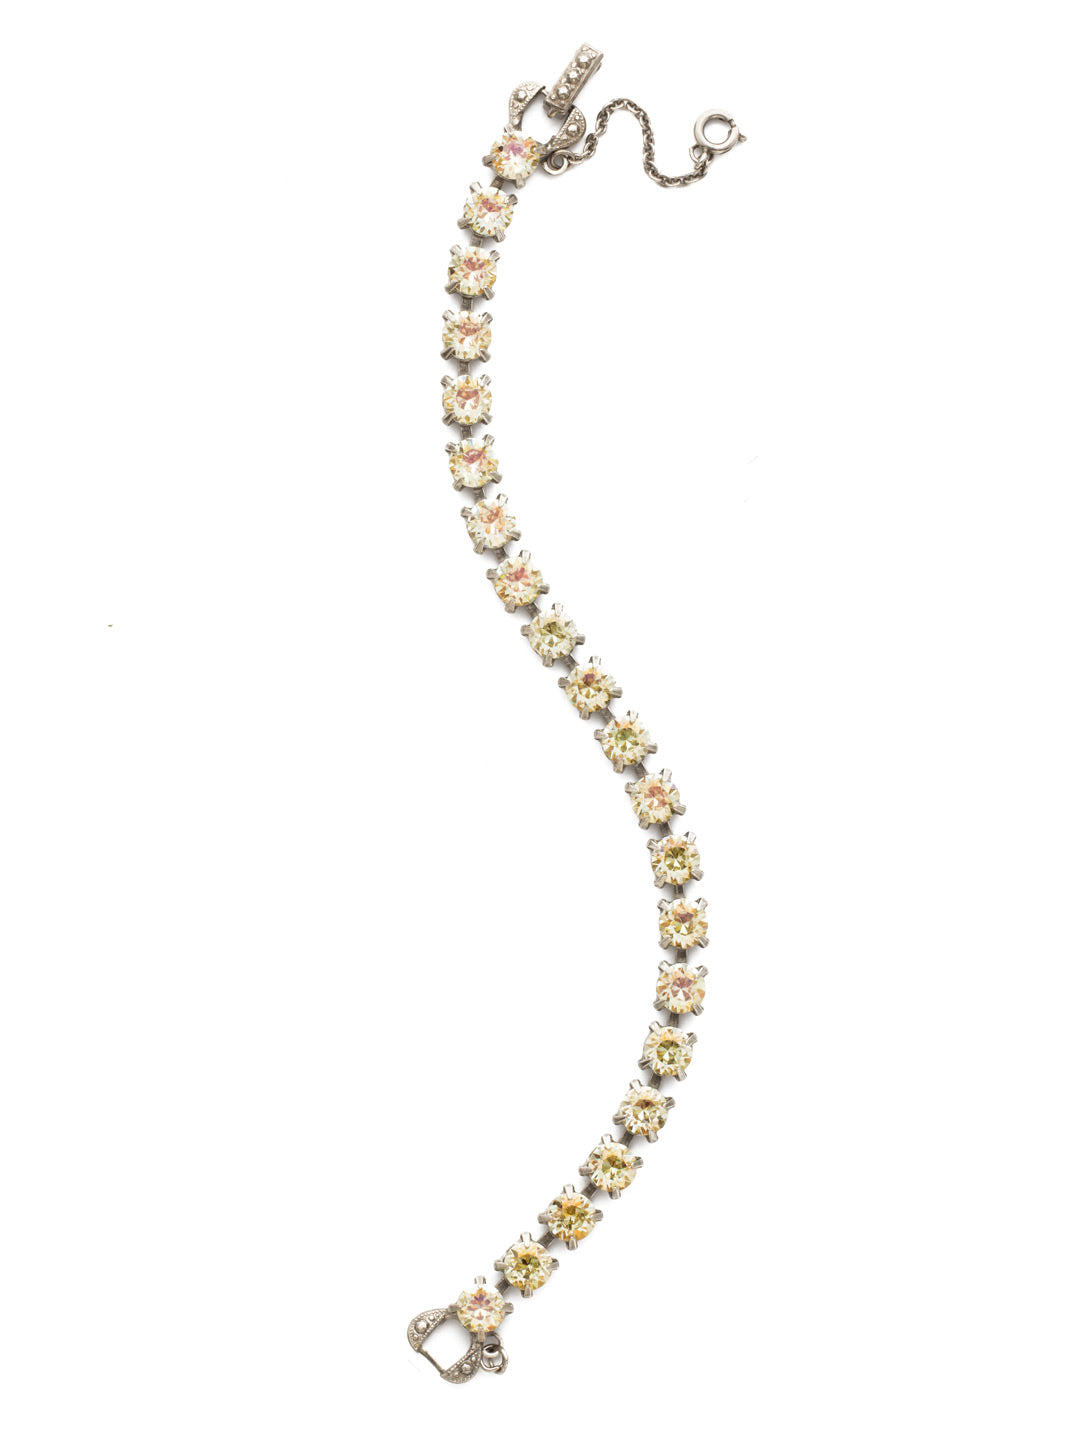 Product Image: Repeating Round Tennis Bracelet